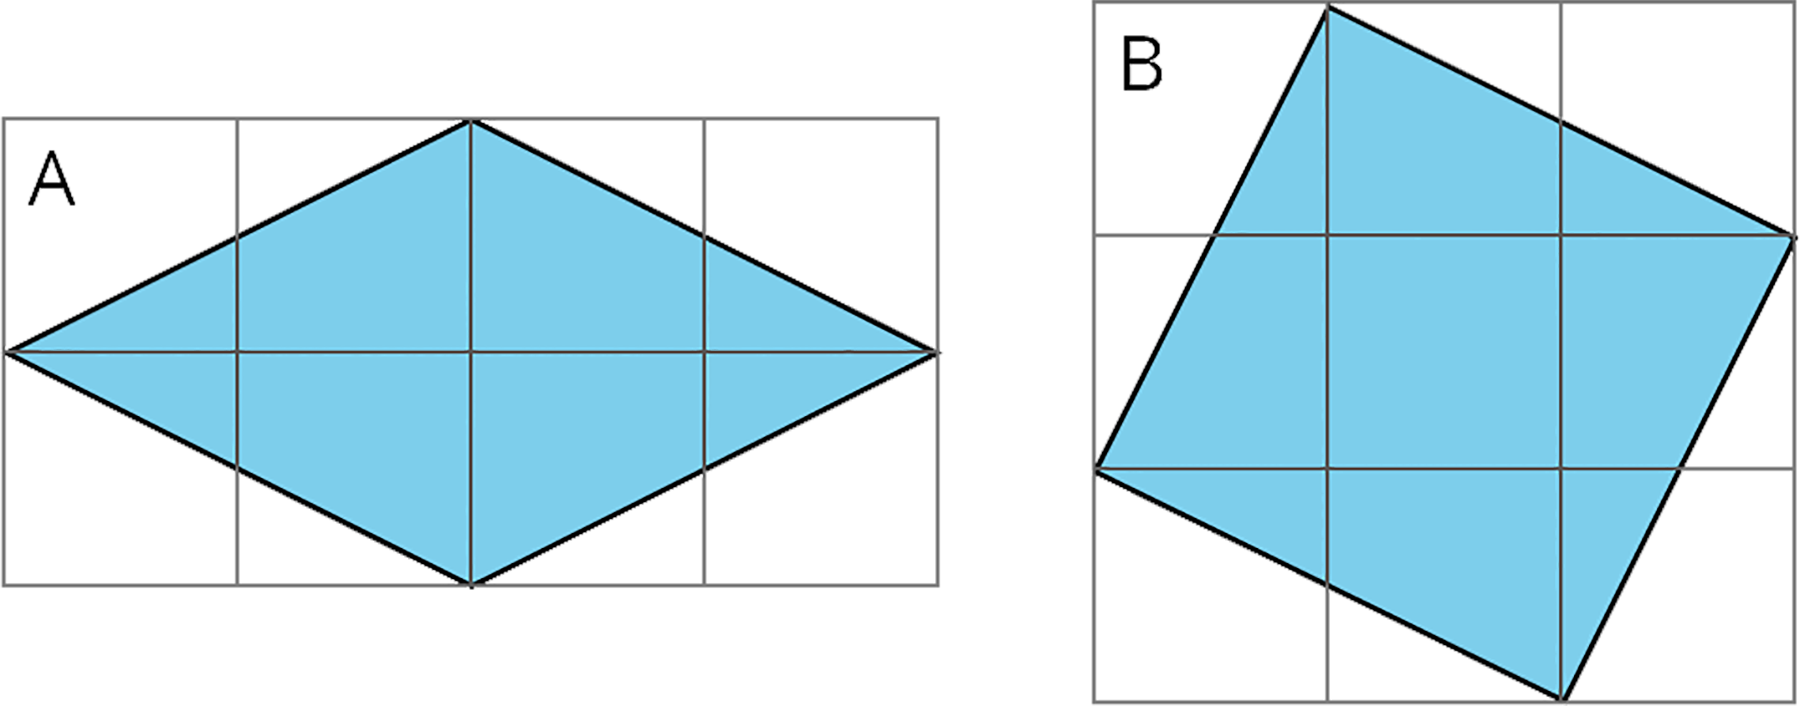 Two quadrilaterals, labeled “A” and “B,” on square grids. Both quadrilaterals are not aligned to the horizontal or vertical gridlines.  Quadrilateral “A” is on a grid that has 2 rows of 4 squares. The quadrilateral is drawn starting at the left most vertex. The second vertex is 2 squares to the right and 1 square up from the first vertex. The third vertex is 2 squares to the right and 1 square down from the second vertex. The fourth vertex is 2 squares to the left and 1 square down from the third vertex. The first vertex is 2 squares to the left and 1 square up from the fourth vertex.   Quadrilateral “B” is on a grid that has 3 rows of 3 squares. The quadrilateral is drawn starting at the left most vertex. The second vertex is 1 square to the right and 2 squares up from the first vertex. The third vertex is 2 squares to the right and 1 square down from the second vertex. The fourth vertex is 1 square to the left and 2 squares down from the third vertex. The first vertex is 2 squares to the left and 1 square up from the fourth vertex. 